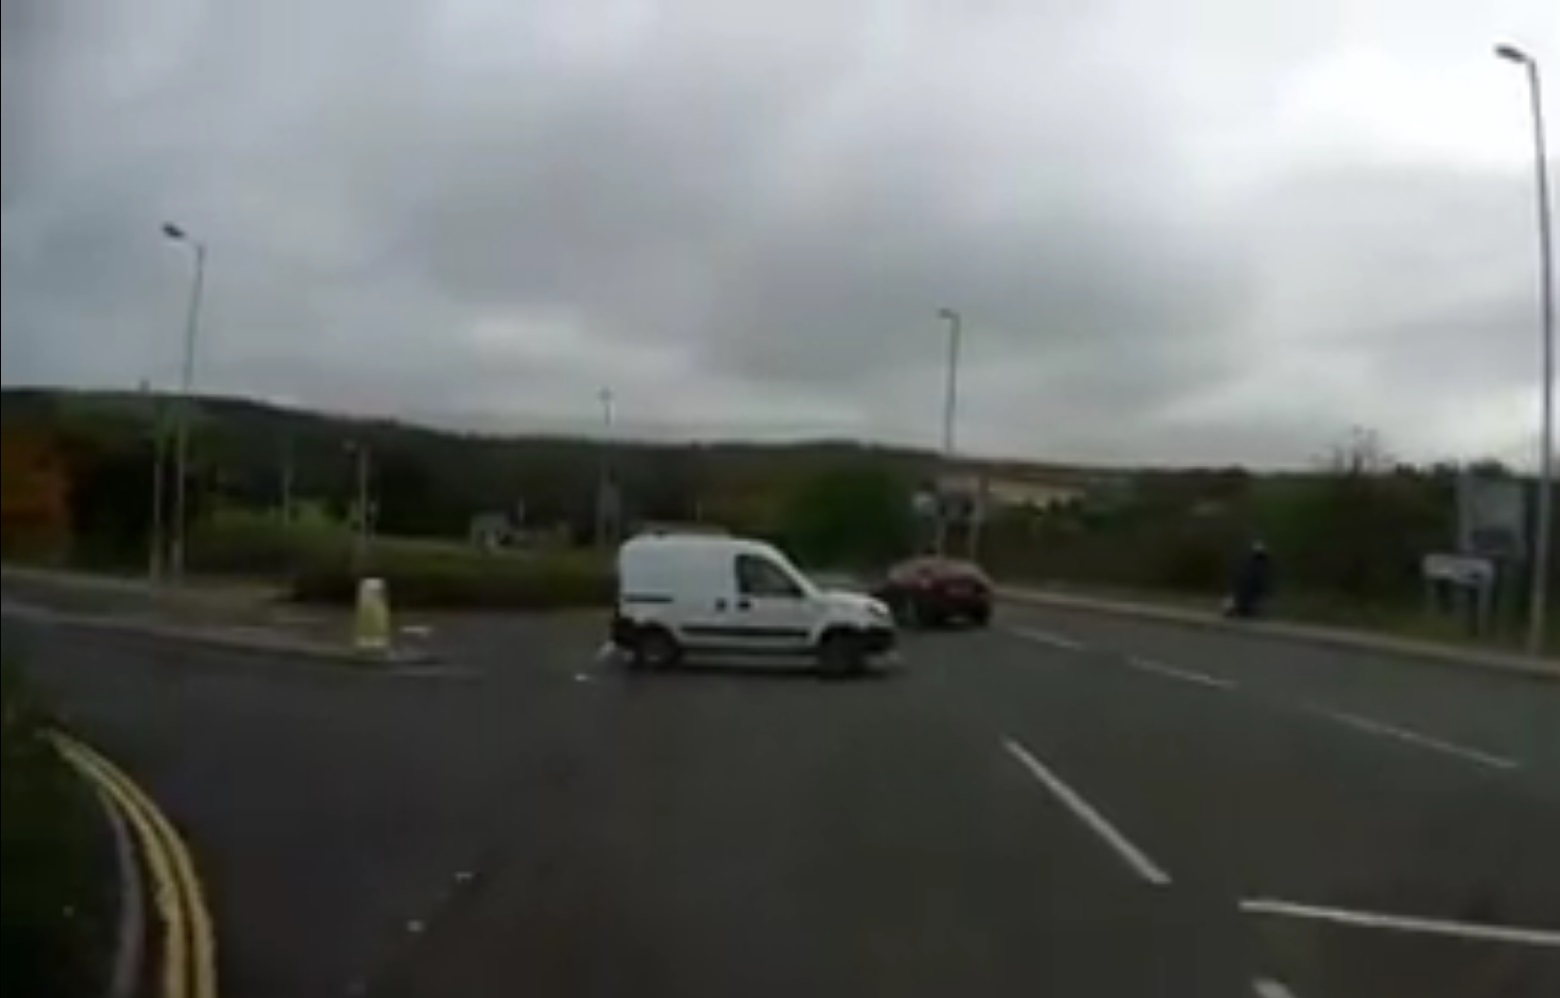 The van driver moves onto the A98 and into oncoming traffic